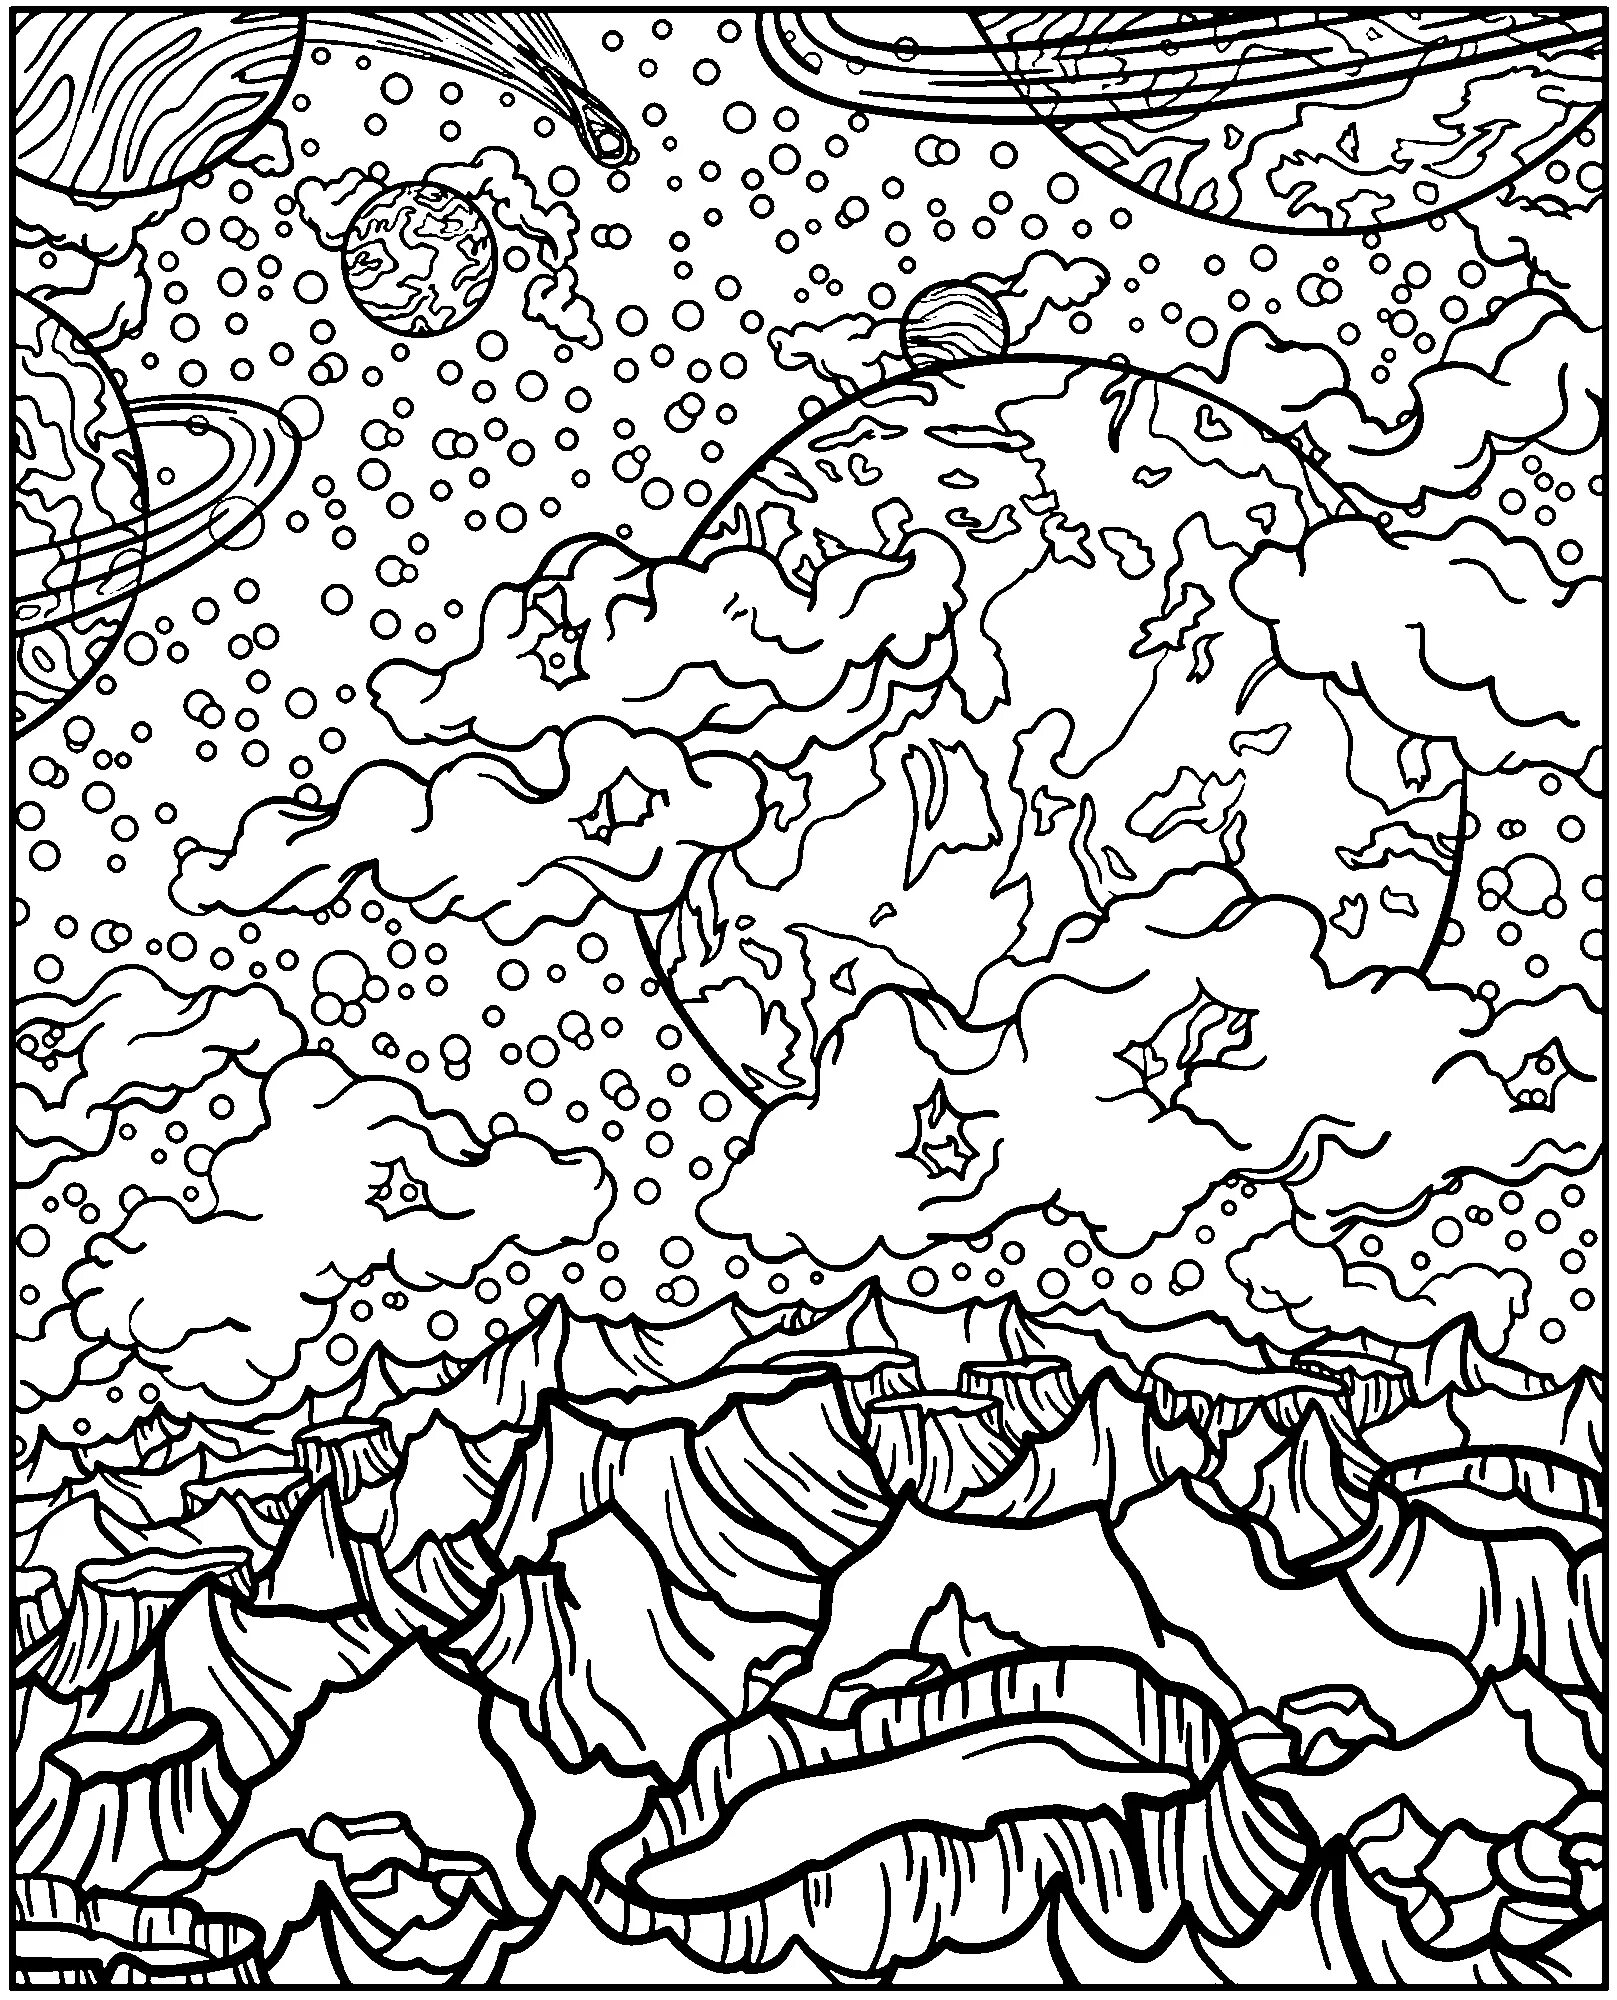 Coloring book fascinating space complex